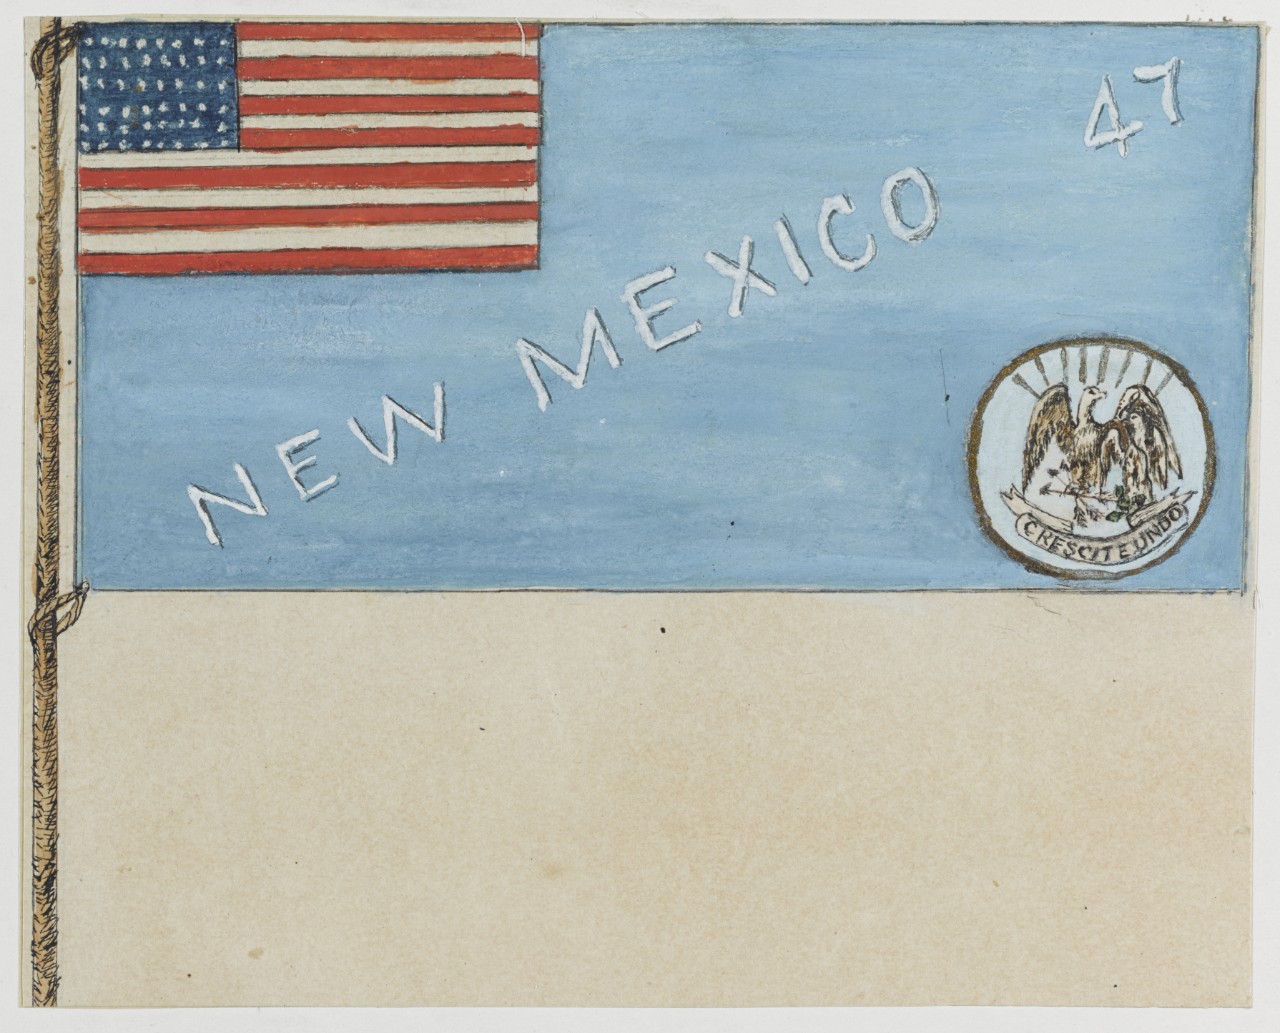 Flag of New Mexico Field Turquoise Blue.